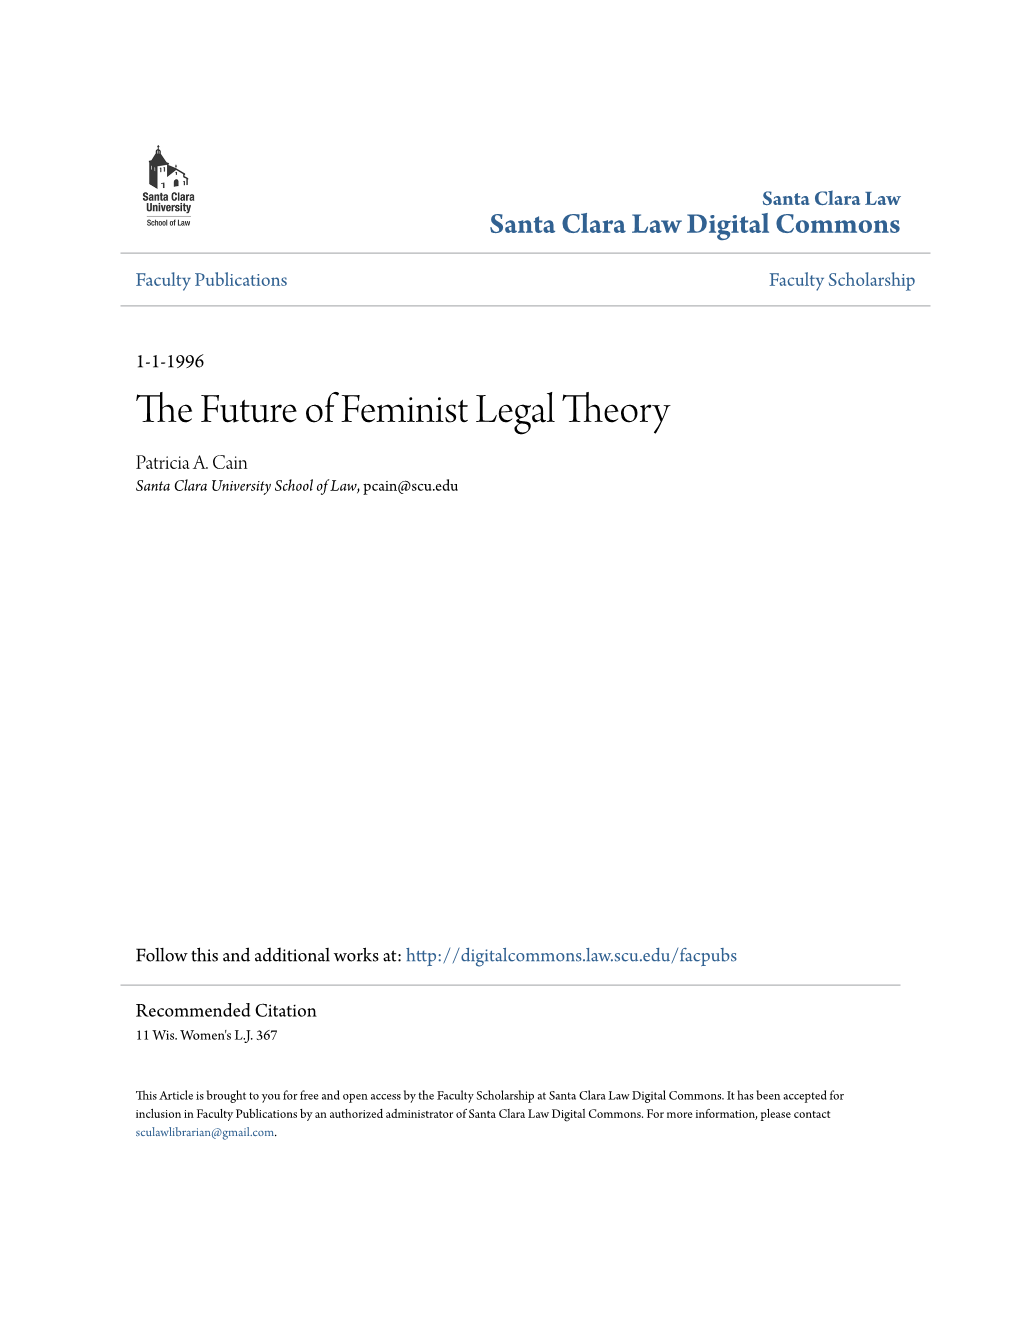 The Future of Feminist Legal Theory